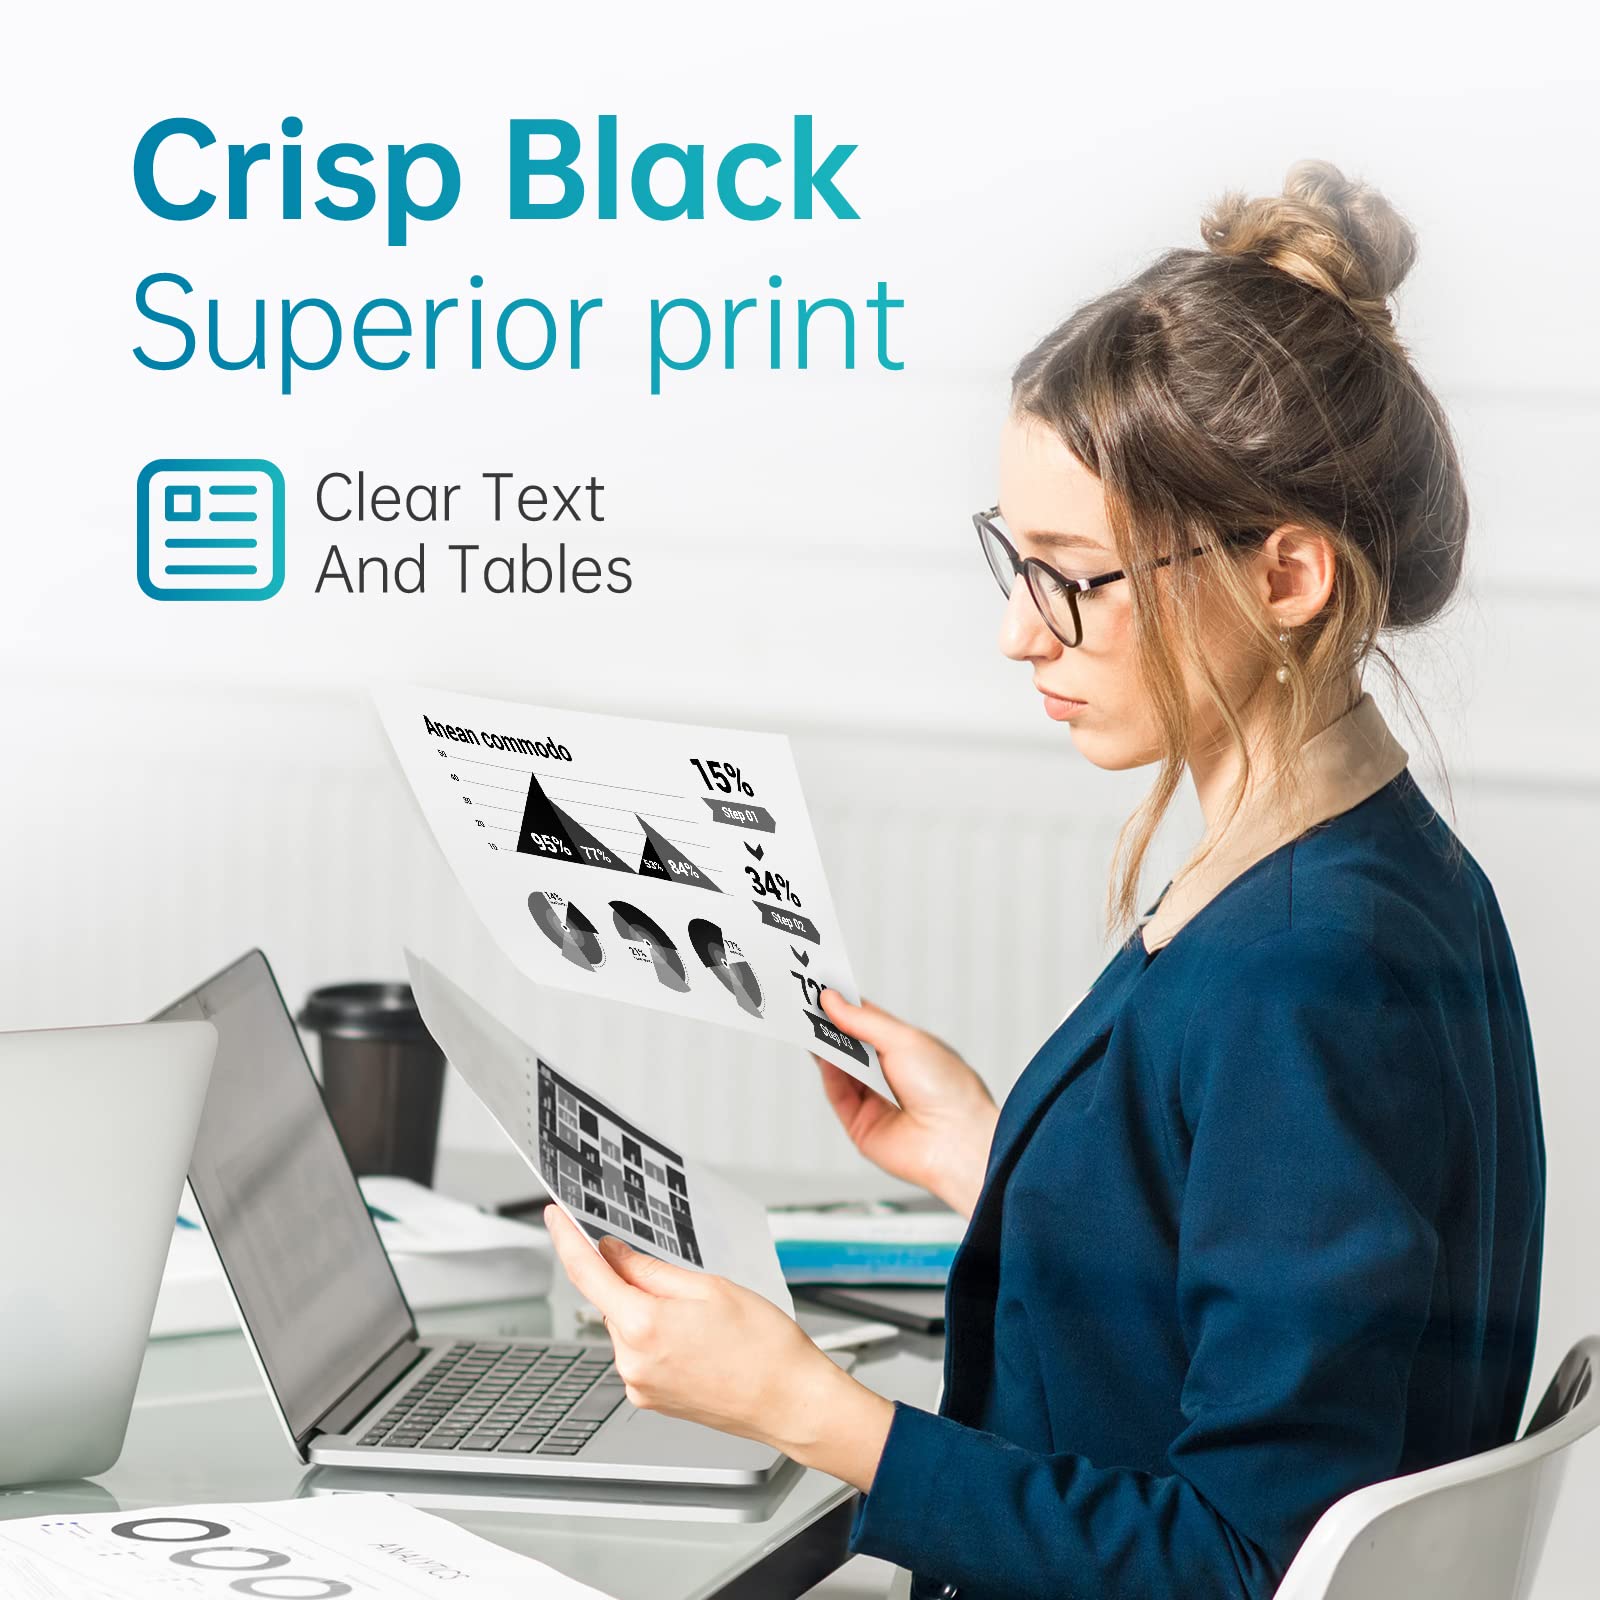 Professional Printing Quality Showcased by LEMERO HP 61XL Black Ink Cartridges:Professional woman reviewing documents printed with LEMERO HP 61XL black ink cartridges, demonstrating crisp, clear text and superior black print quality.